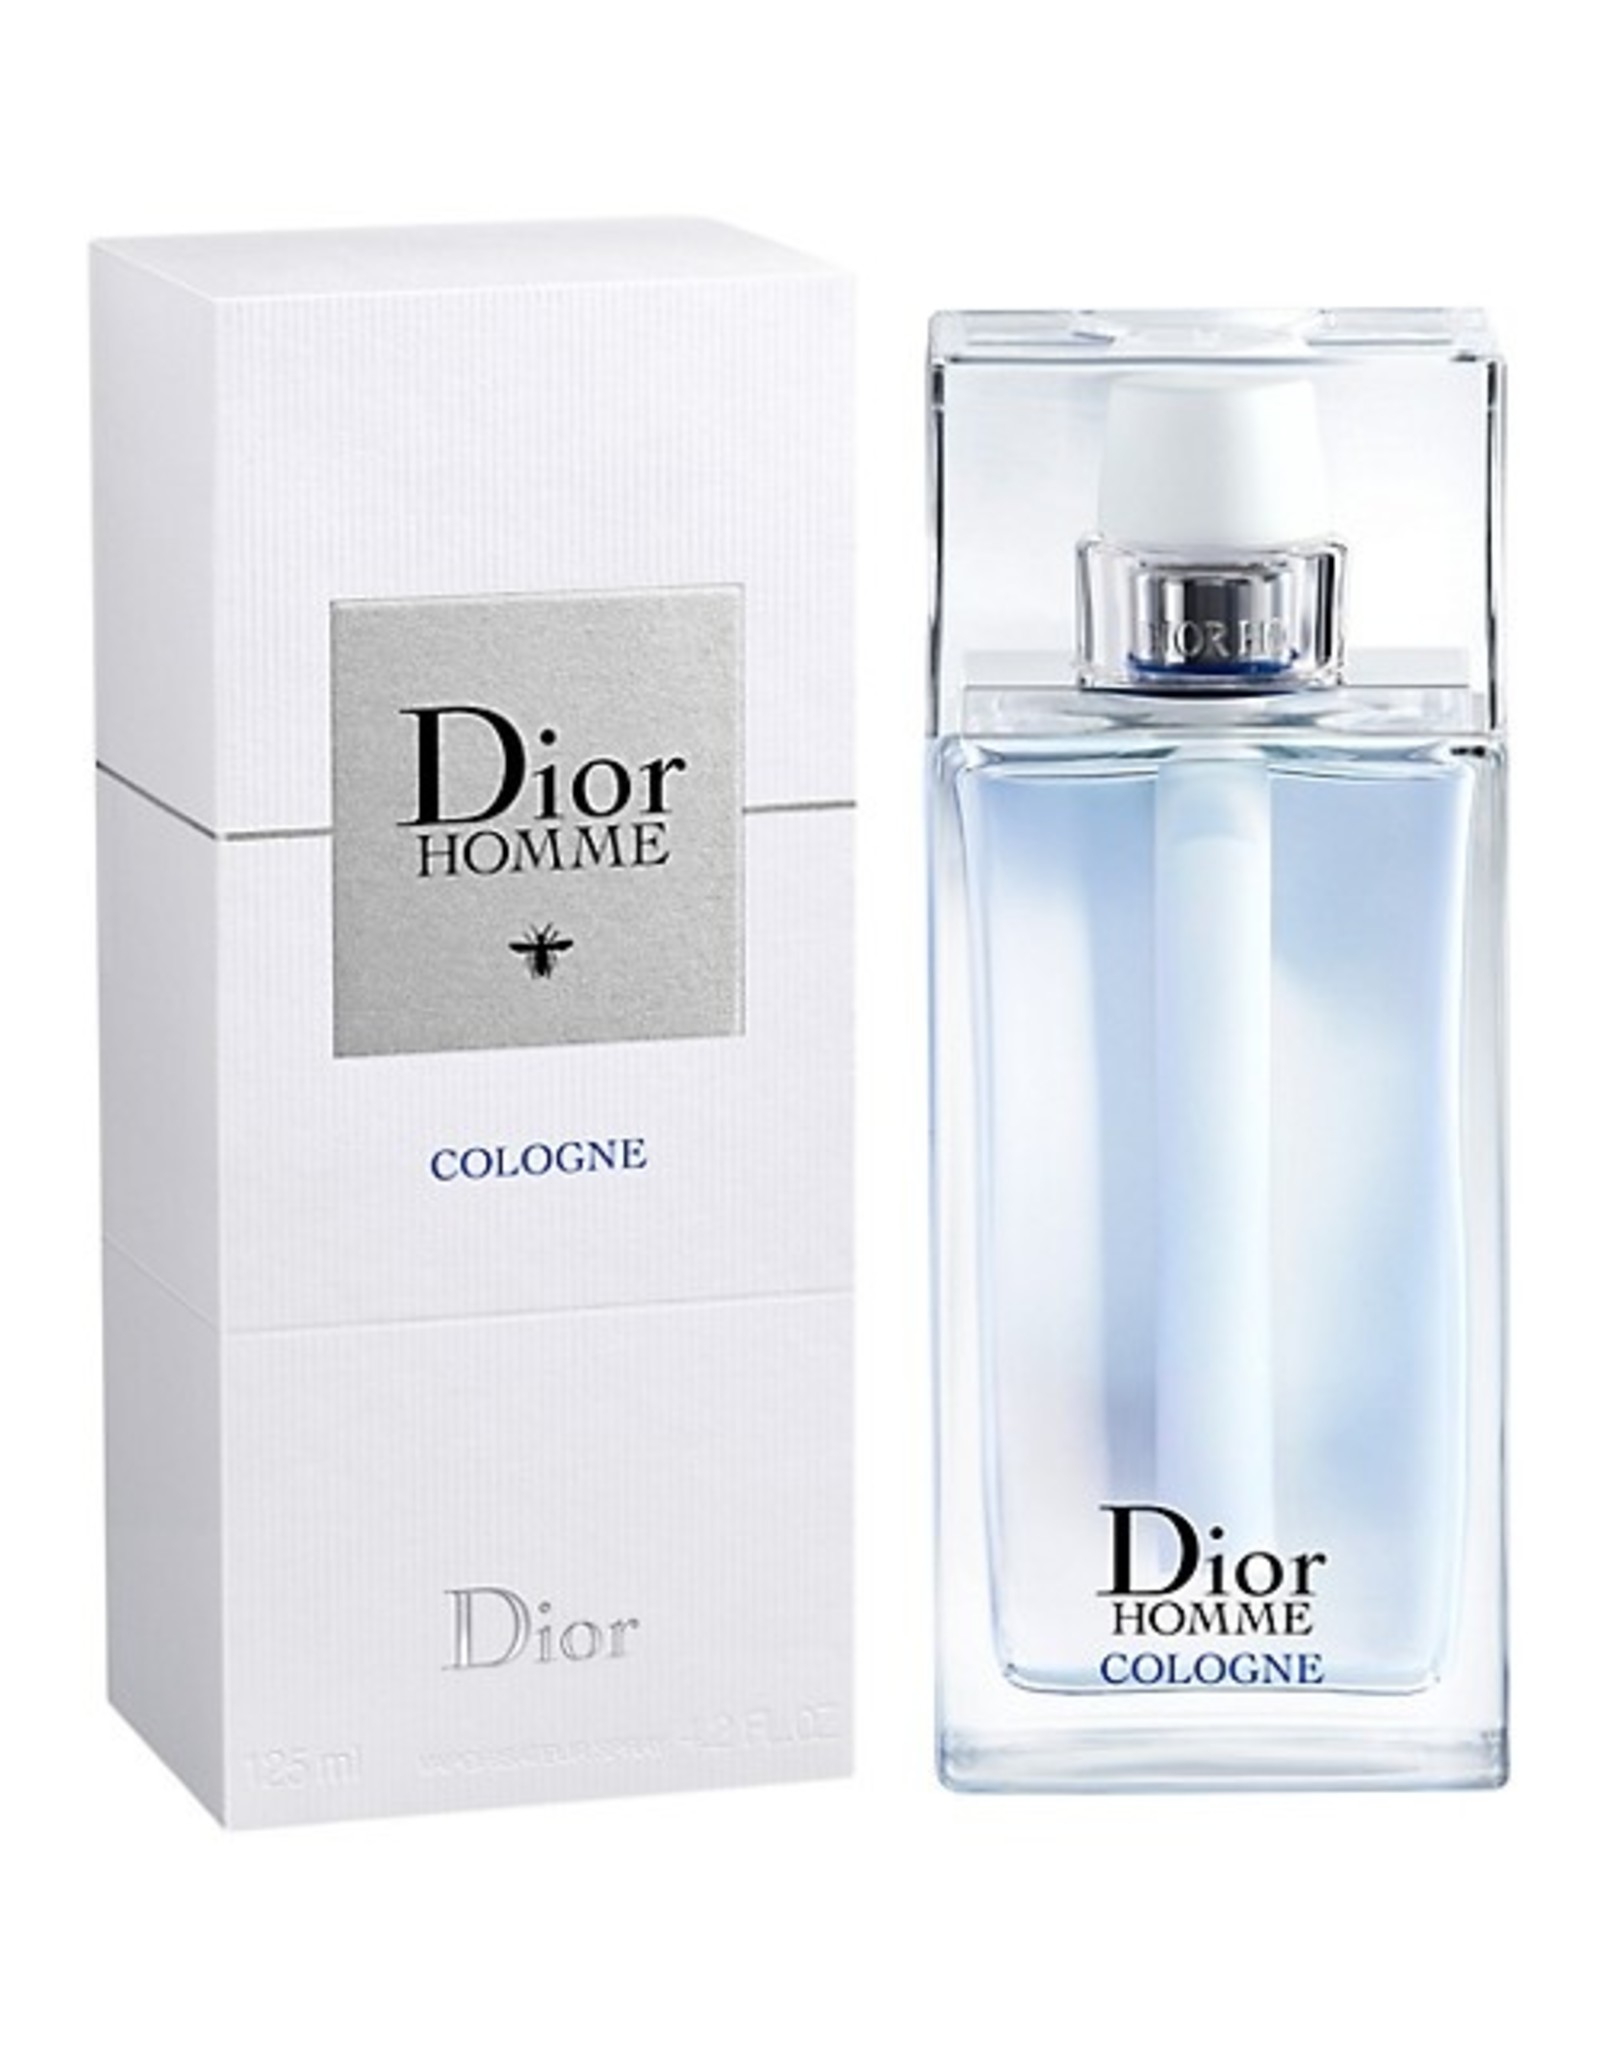 CHRISTIAN DIOR CHRISTIAN DIOR HOMME COLOGNE